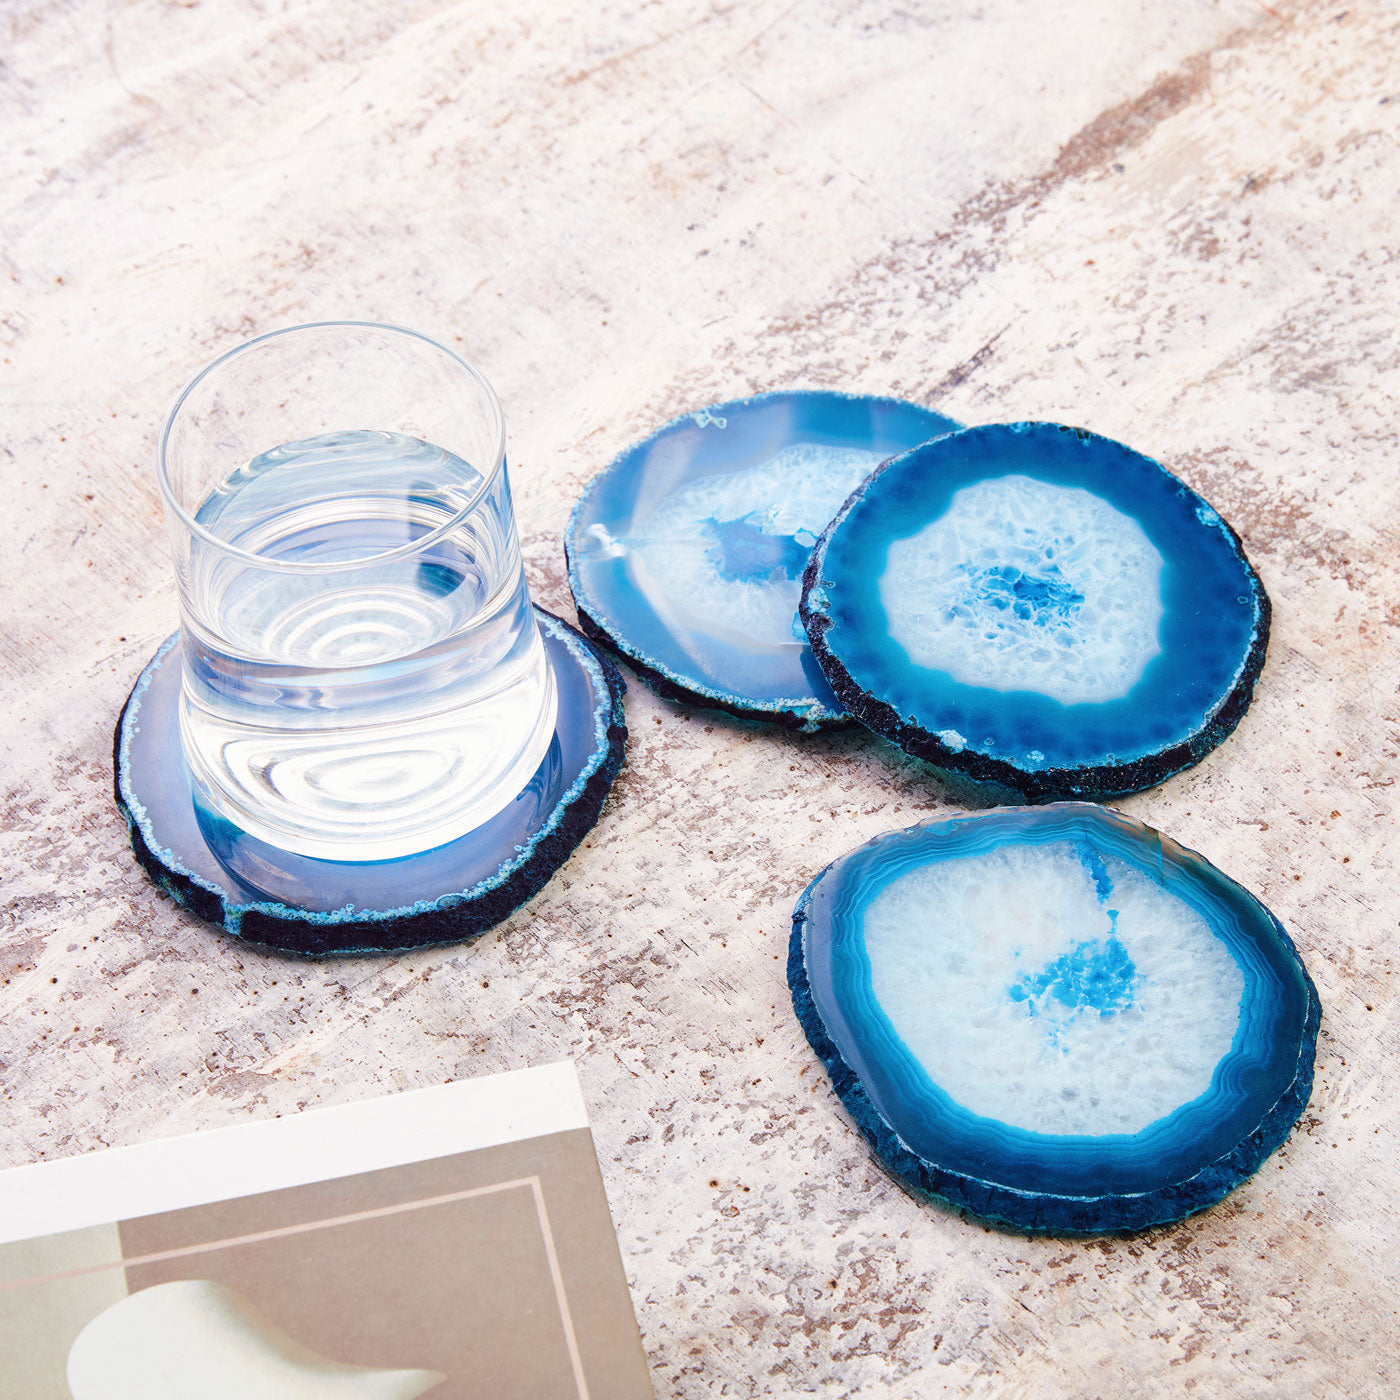 Set of 4 Natural Brazilian Agate Drink Coasters with Wood Holder - Ocean